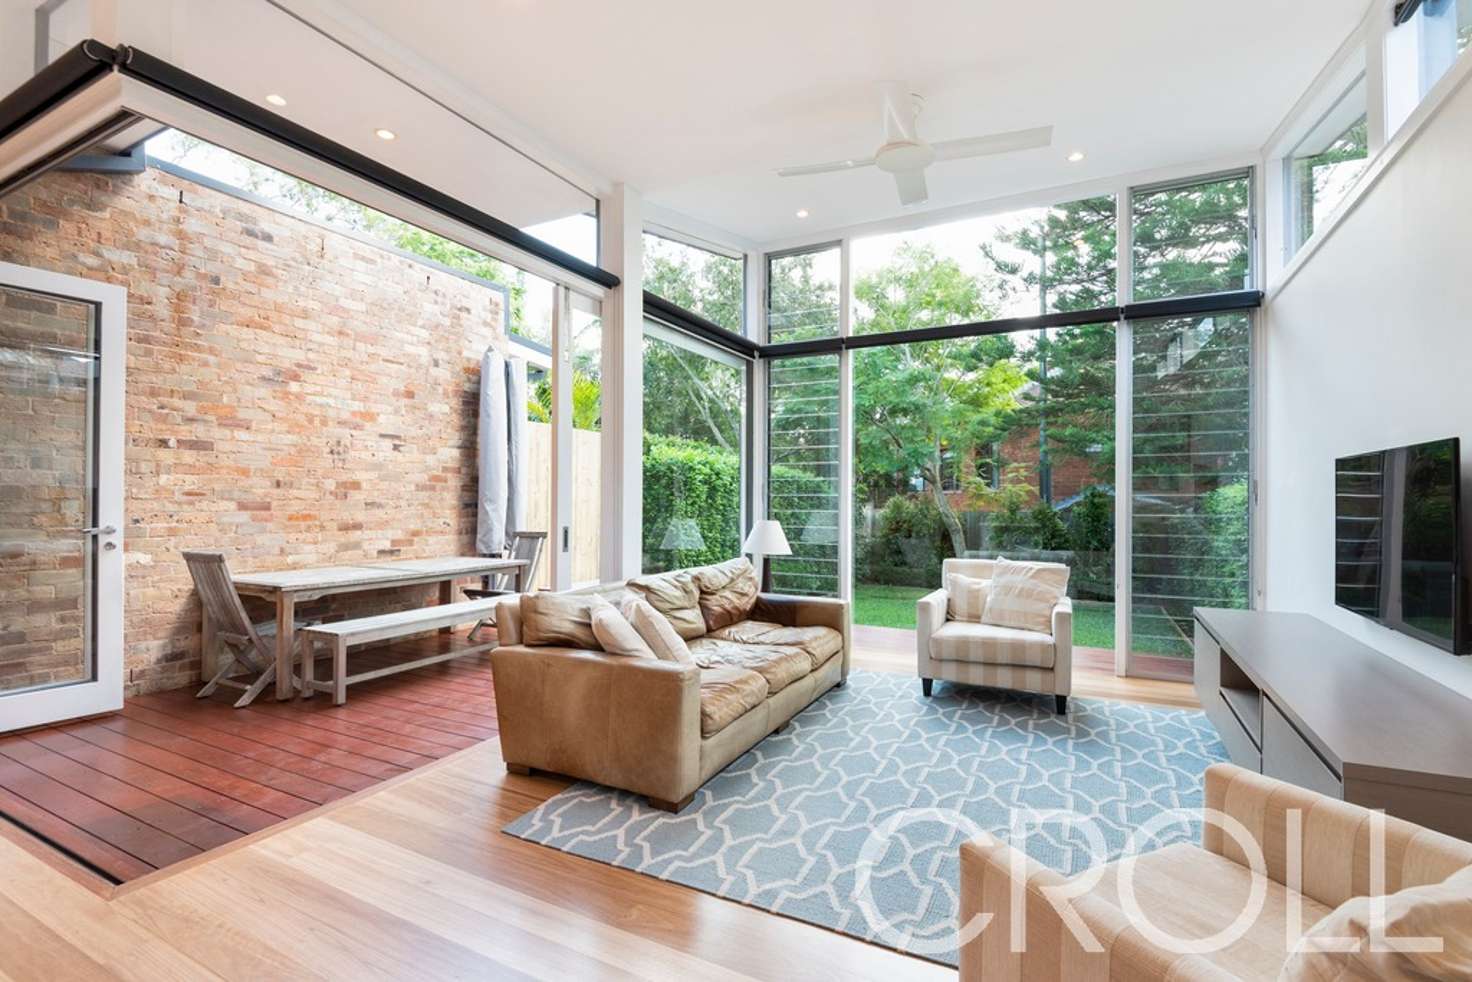 Main view of Homely house listing, 90 Cammeray Rd, Cammeray NSW 2062